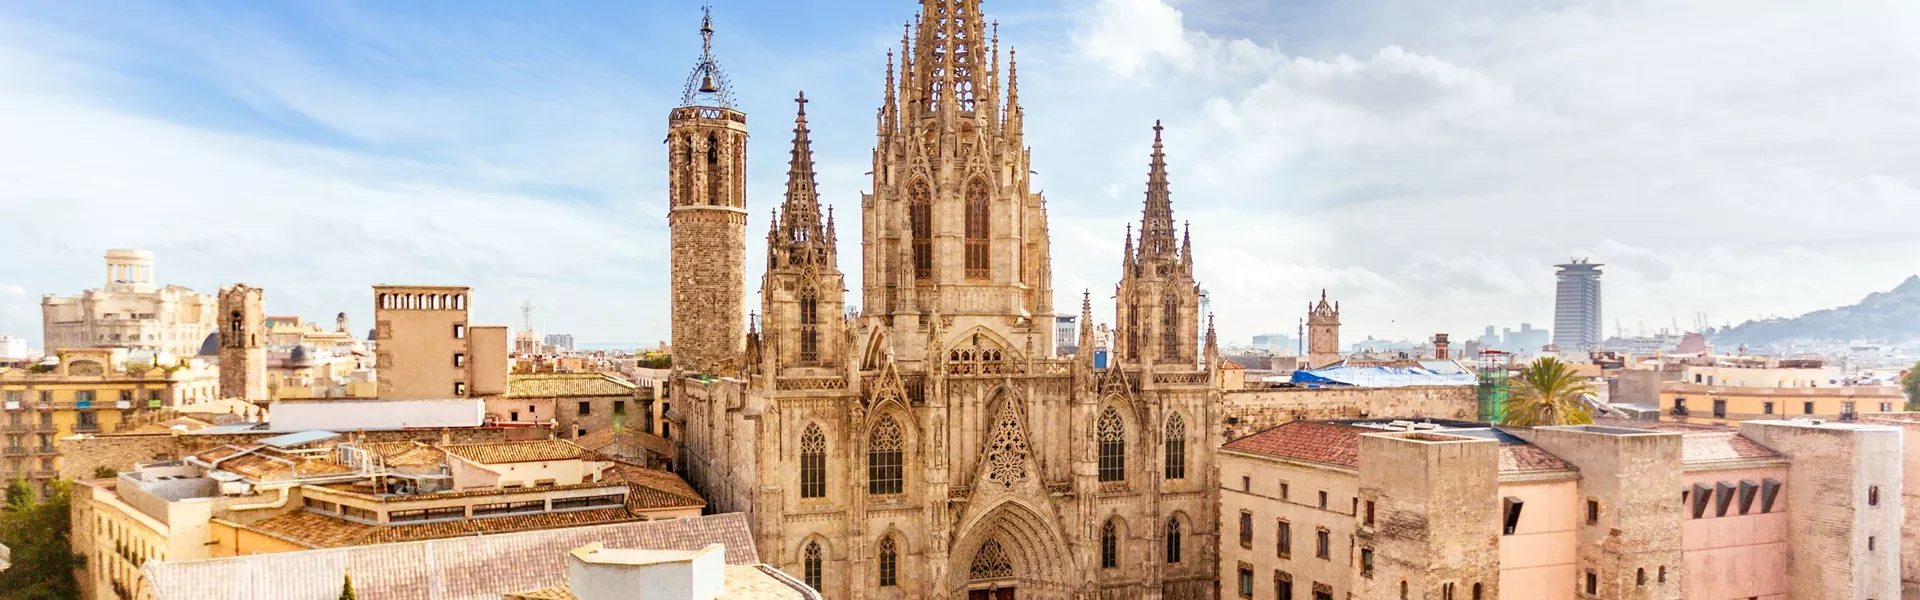 Barcelona skyline with Barcelona Cathedral